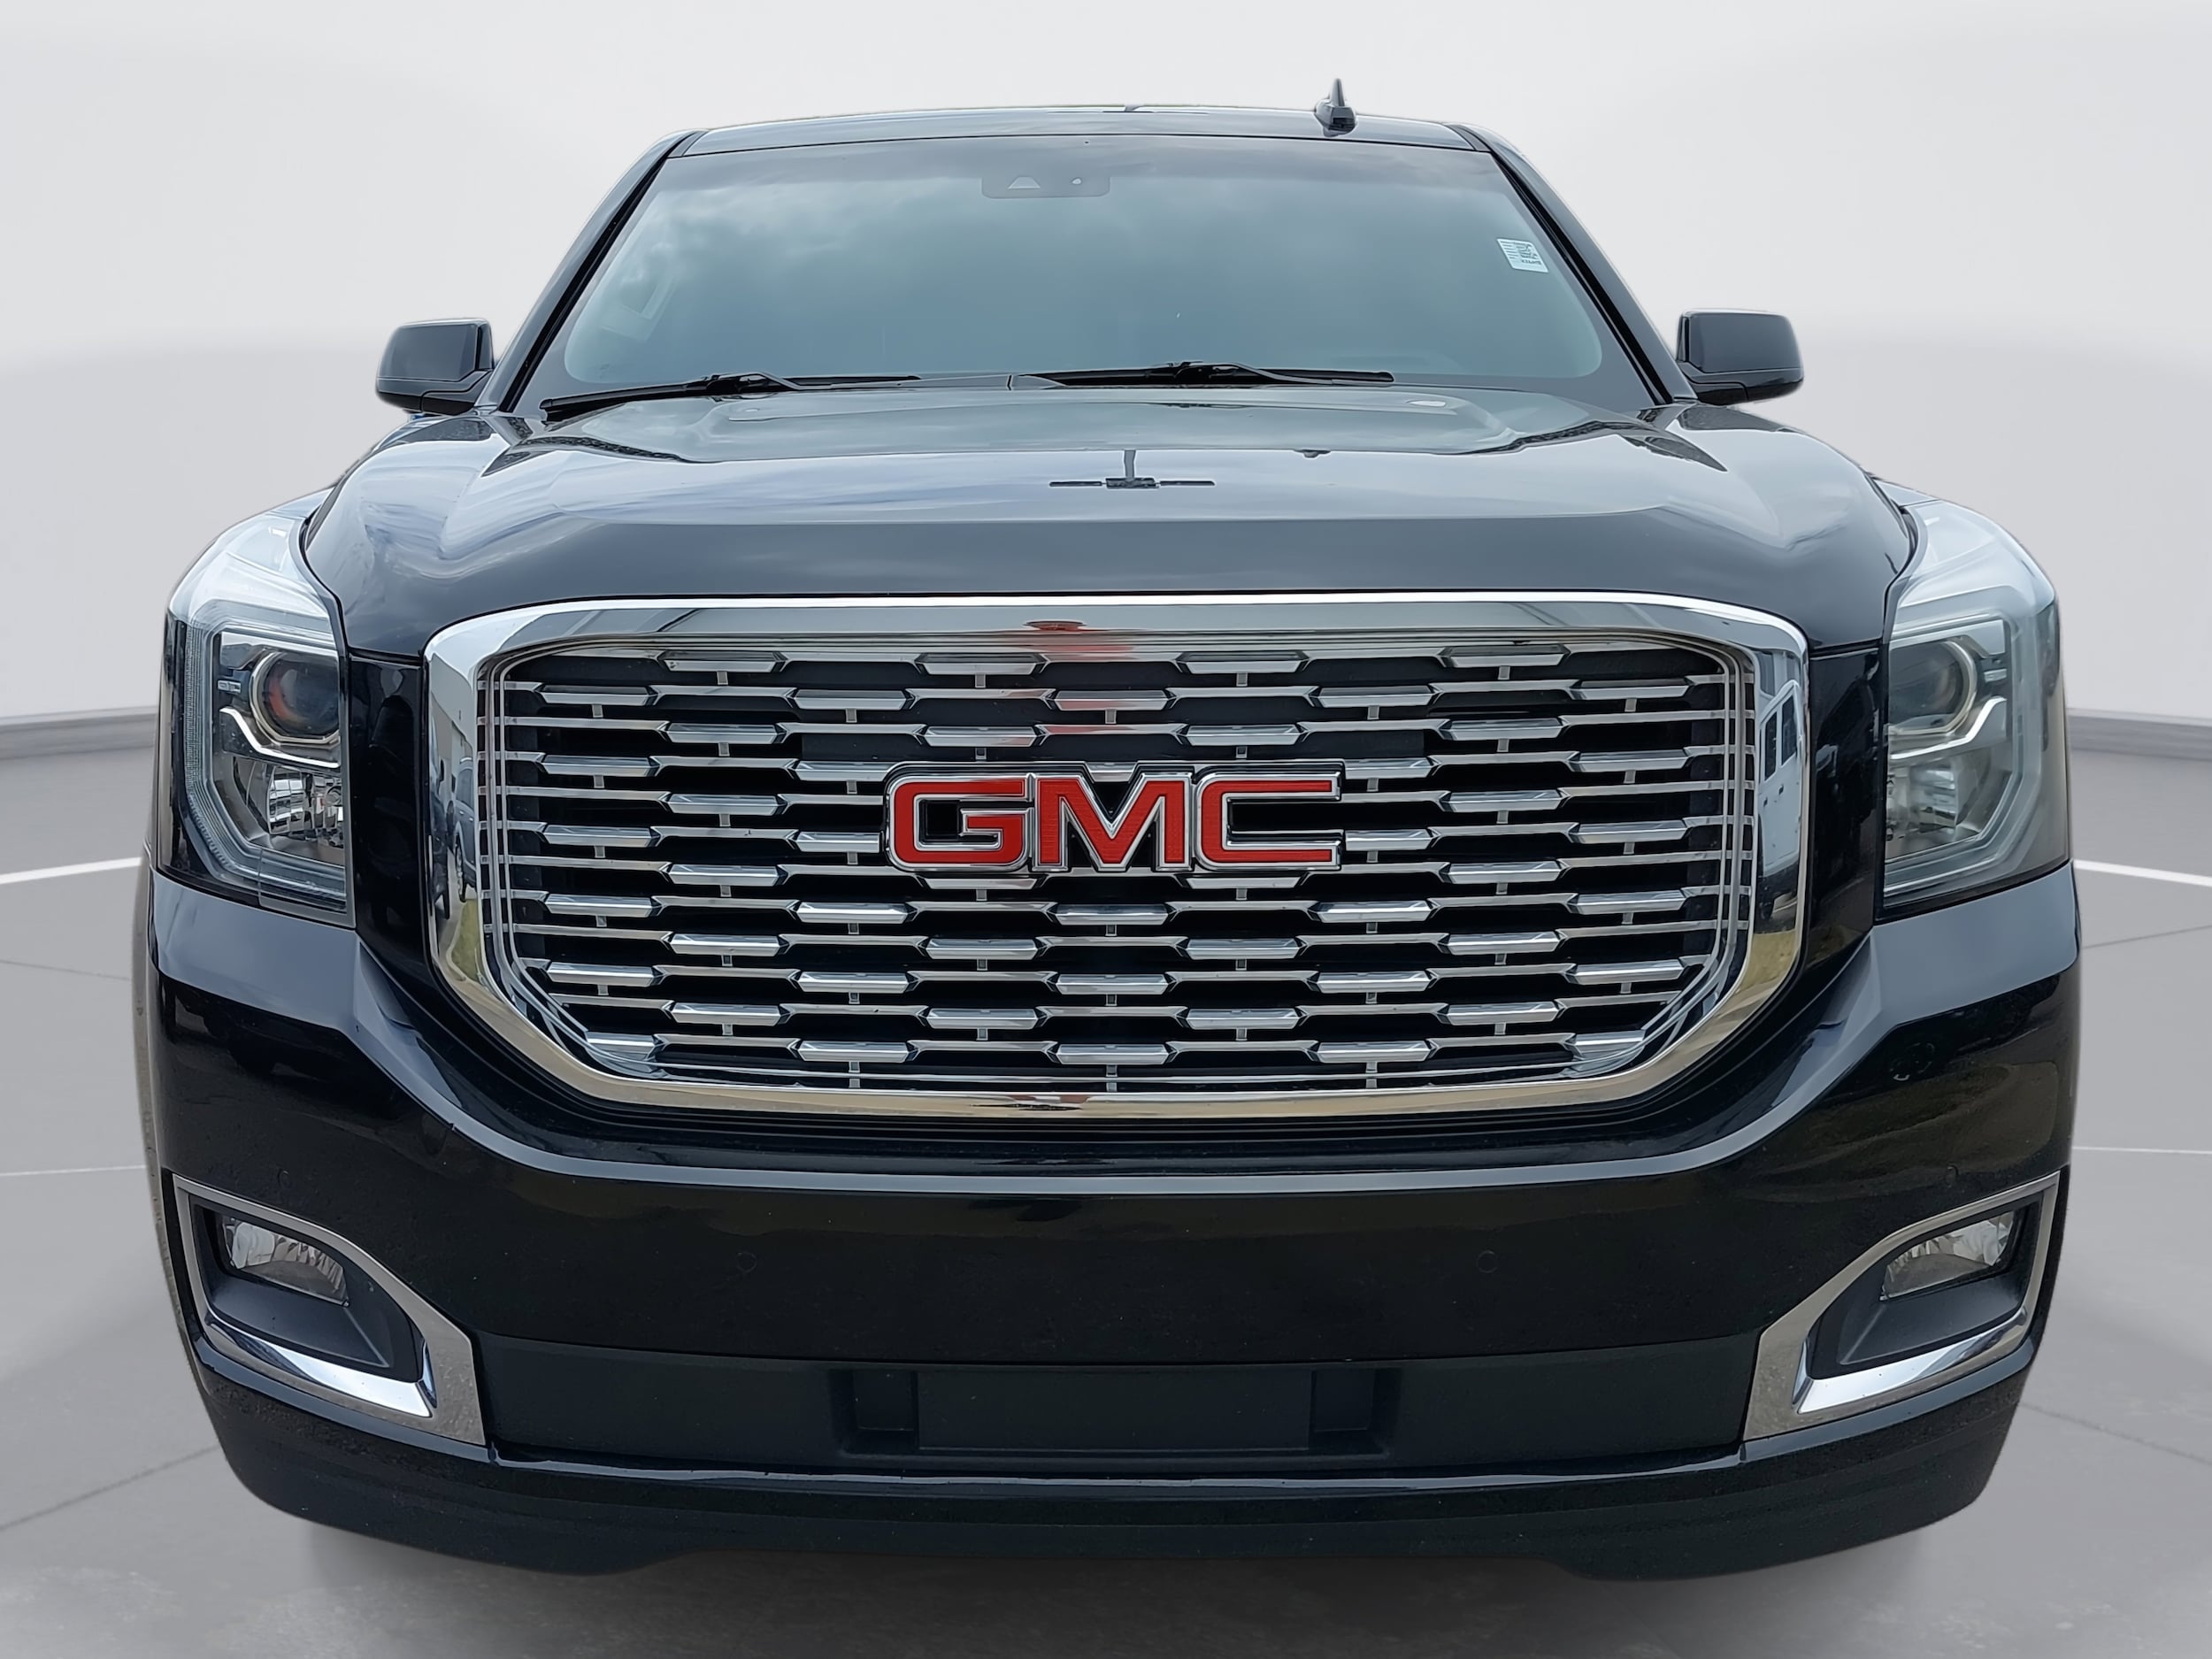 Used 2018 GMC Yukon XL Denali with VIN 1GKS2HKJ6JR373648 for sale in Wendell, NC